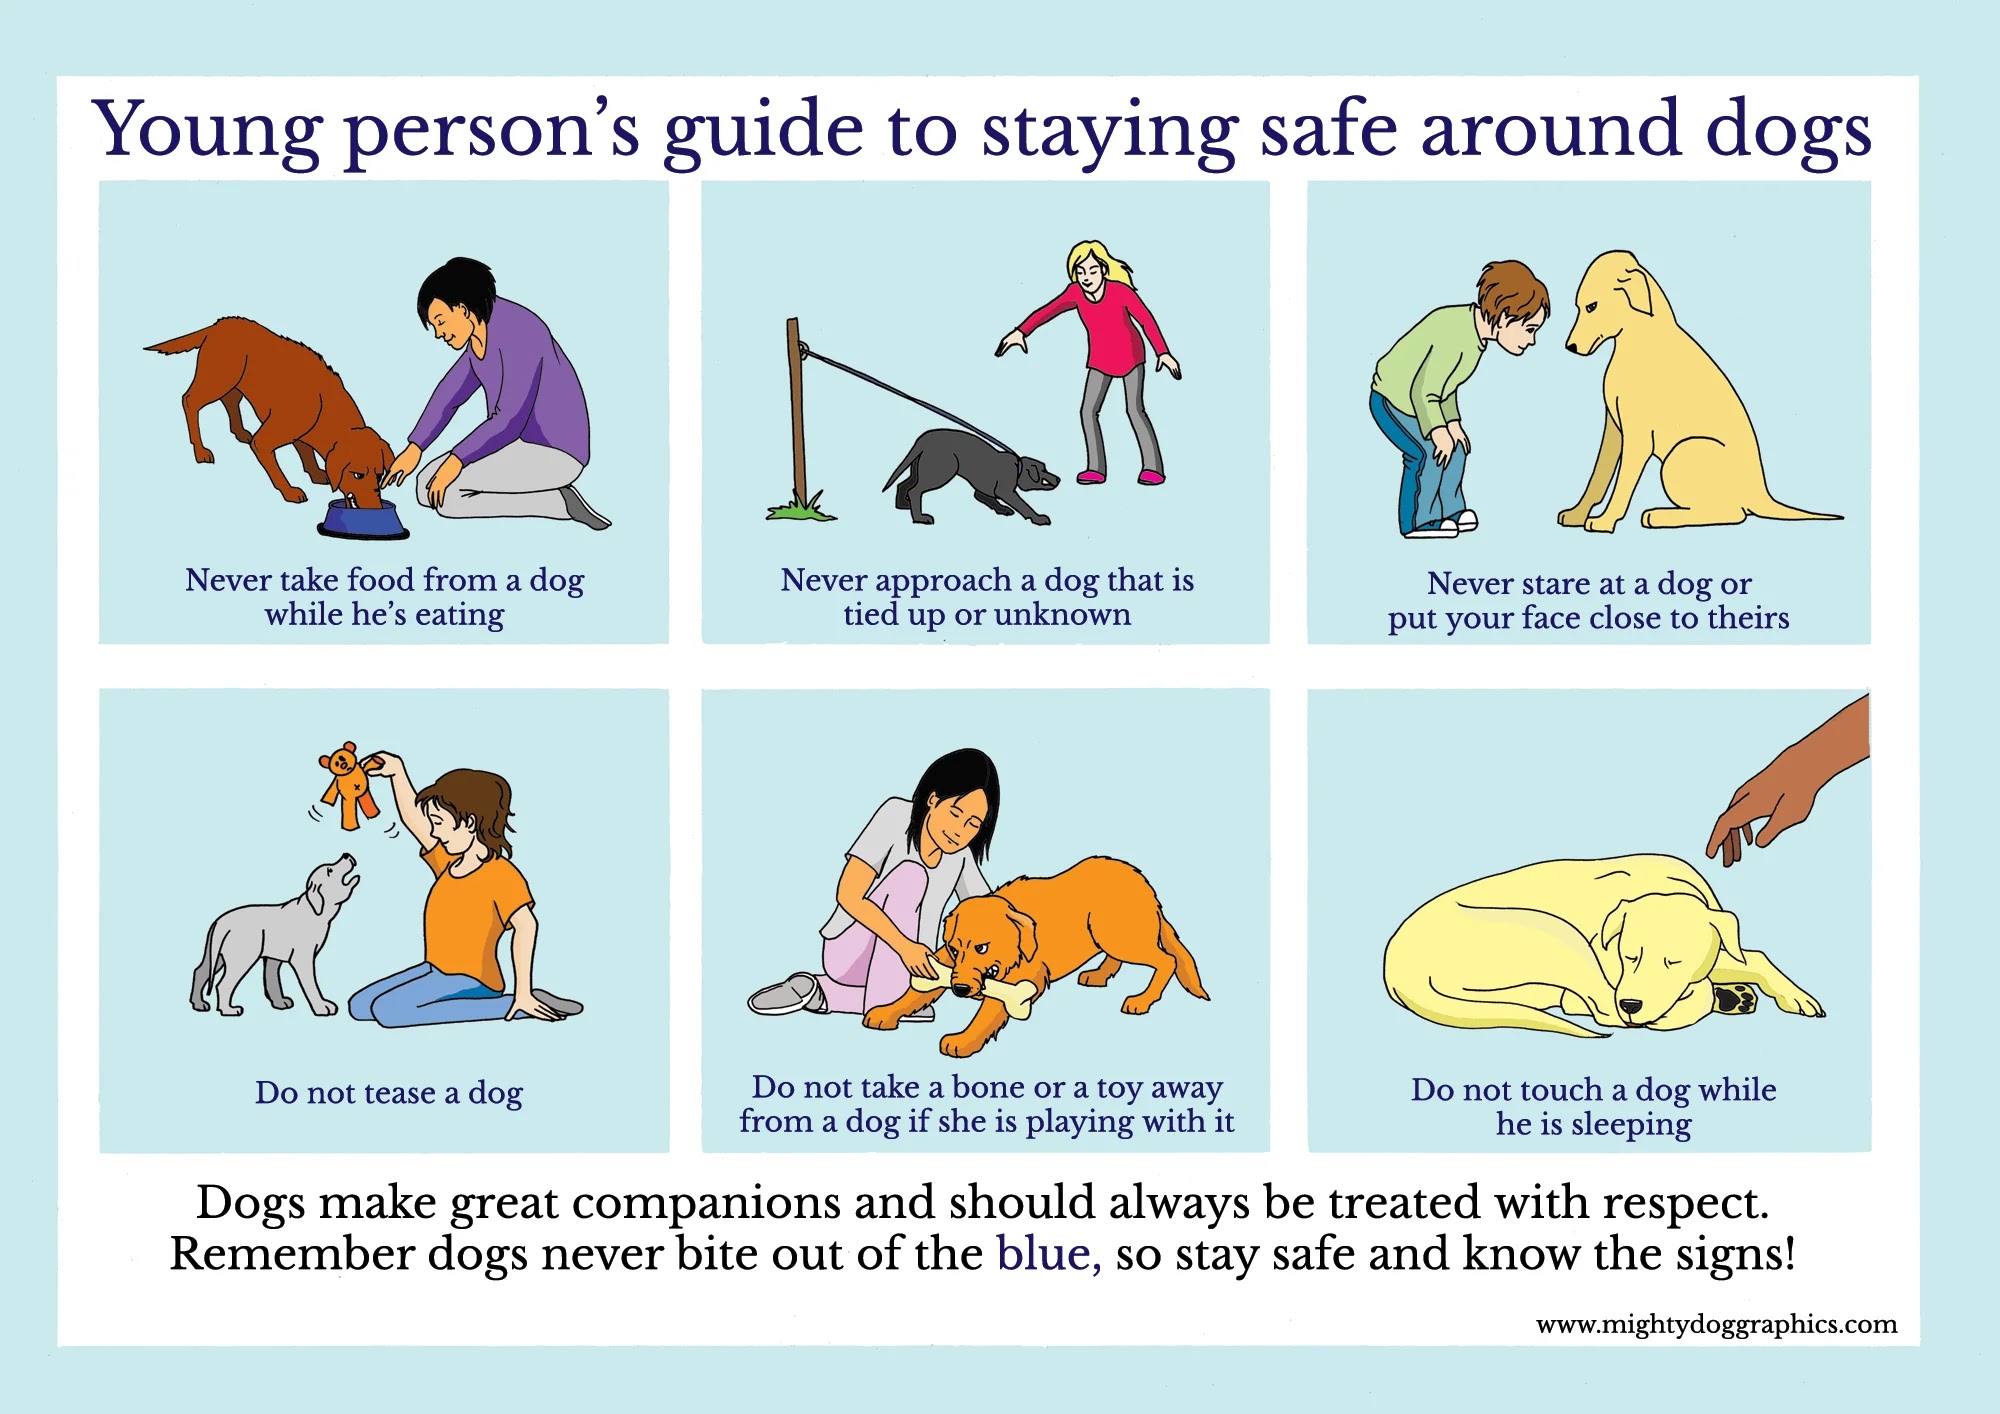 general guide about staying safe around dogs